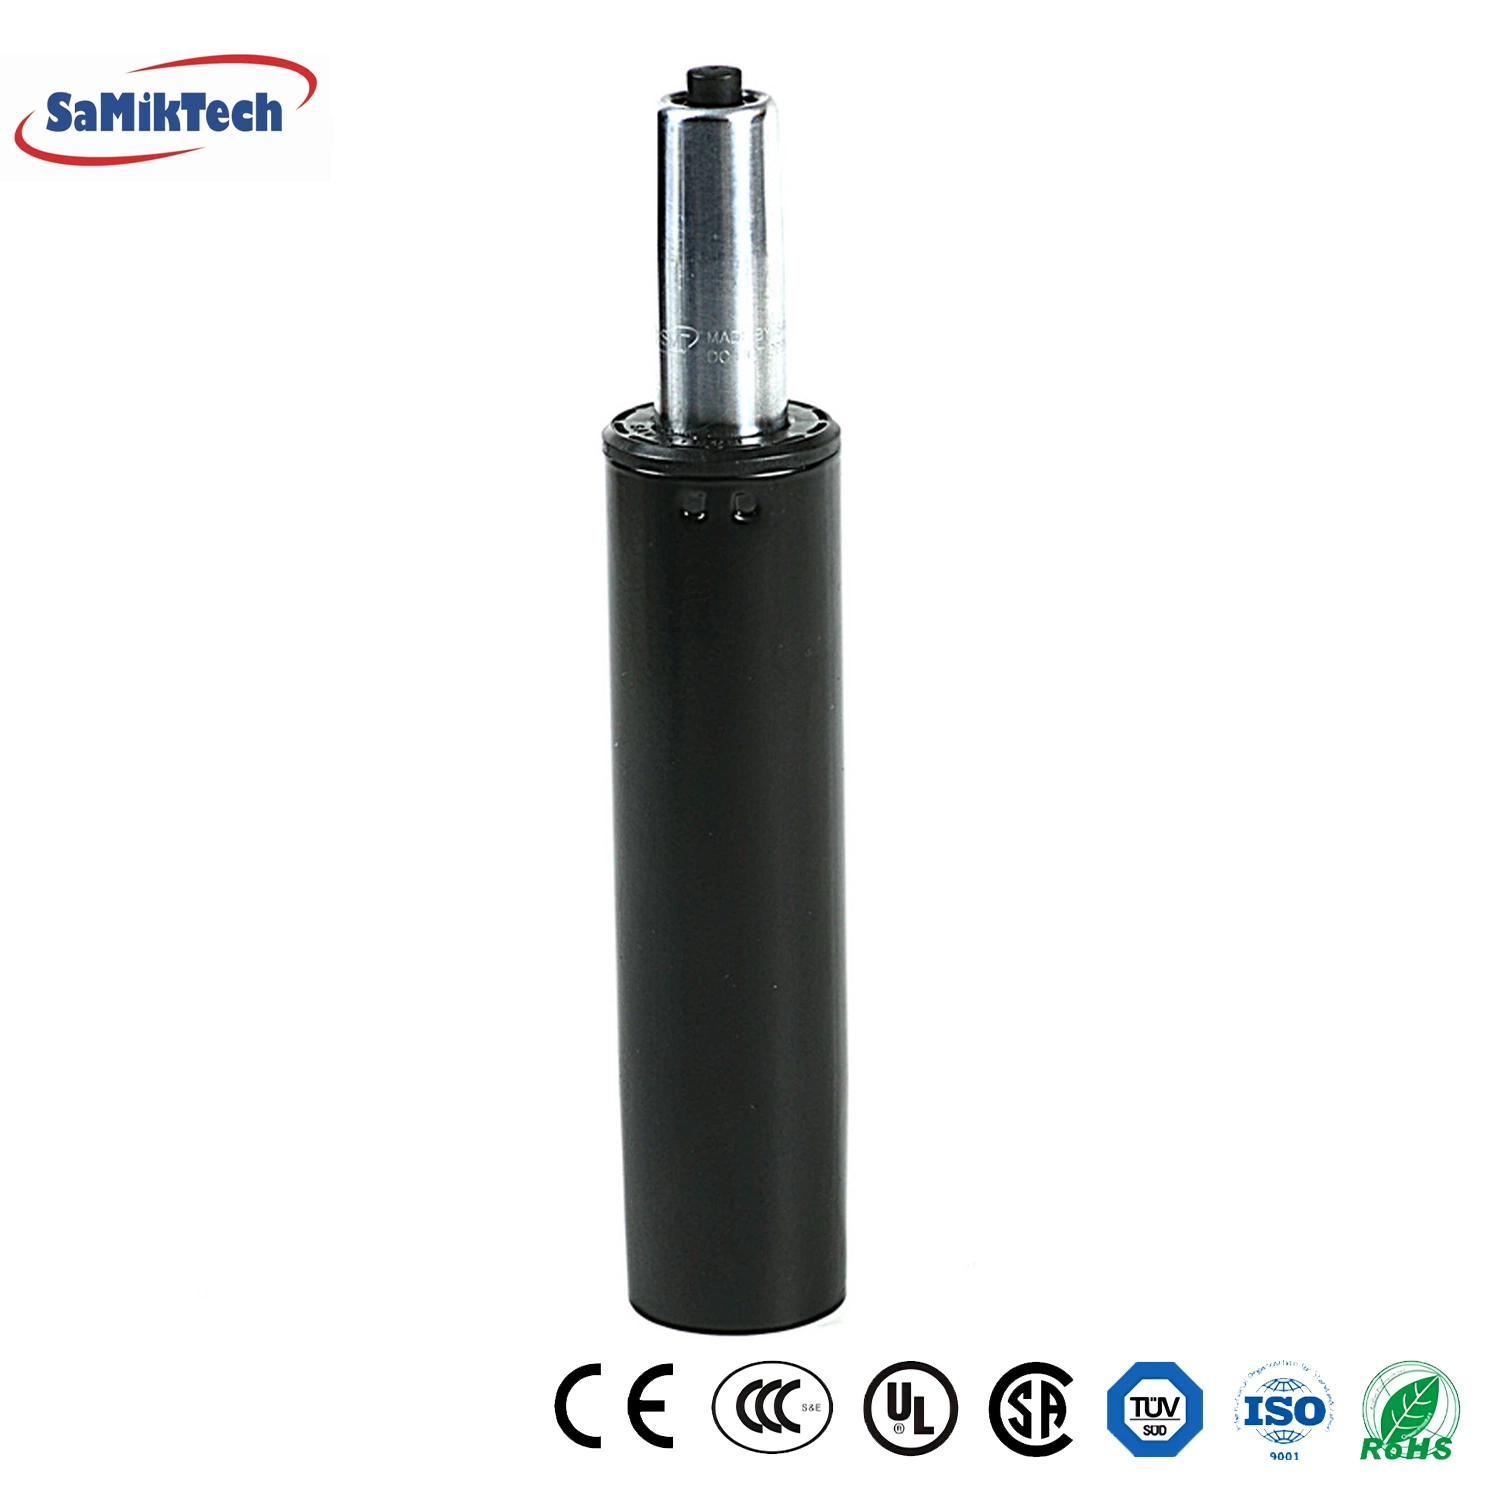 Furniture Gas Spring for Office Chair Pneumatic Rod Adjustable Gas Lift Cylinder for Office Desk Chair Good Sale